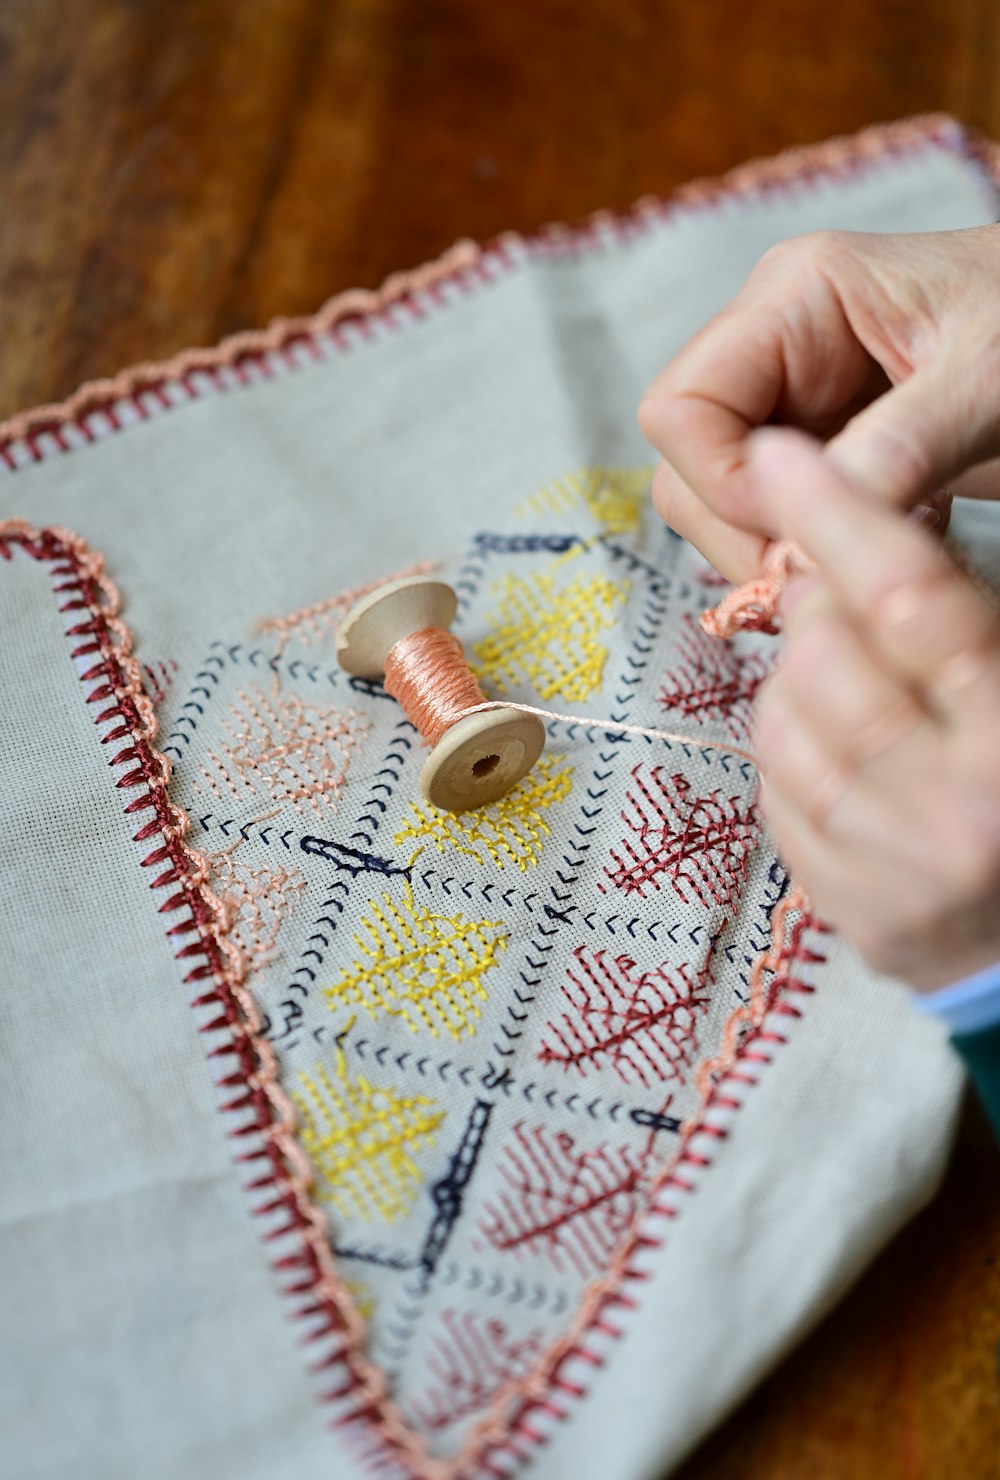 a person is stitching a piece of fabric on a table